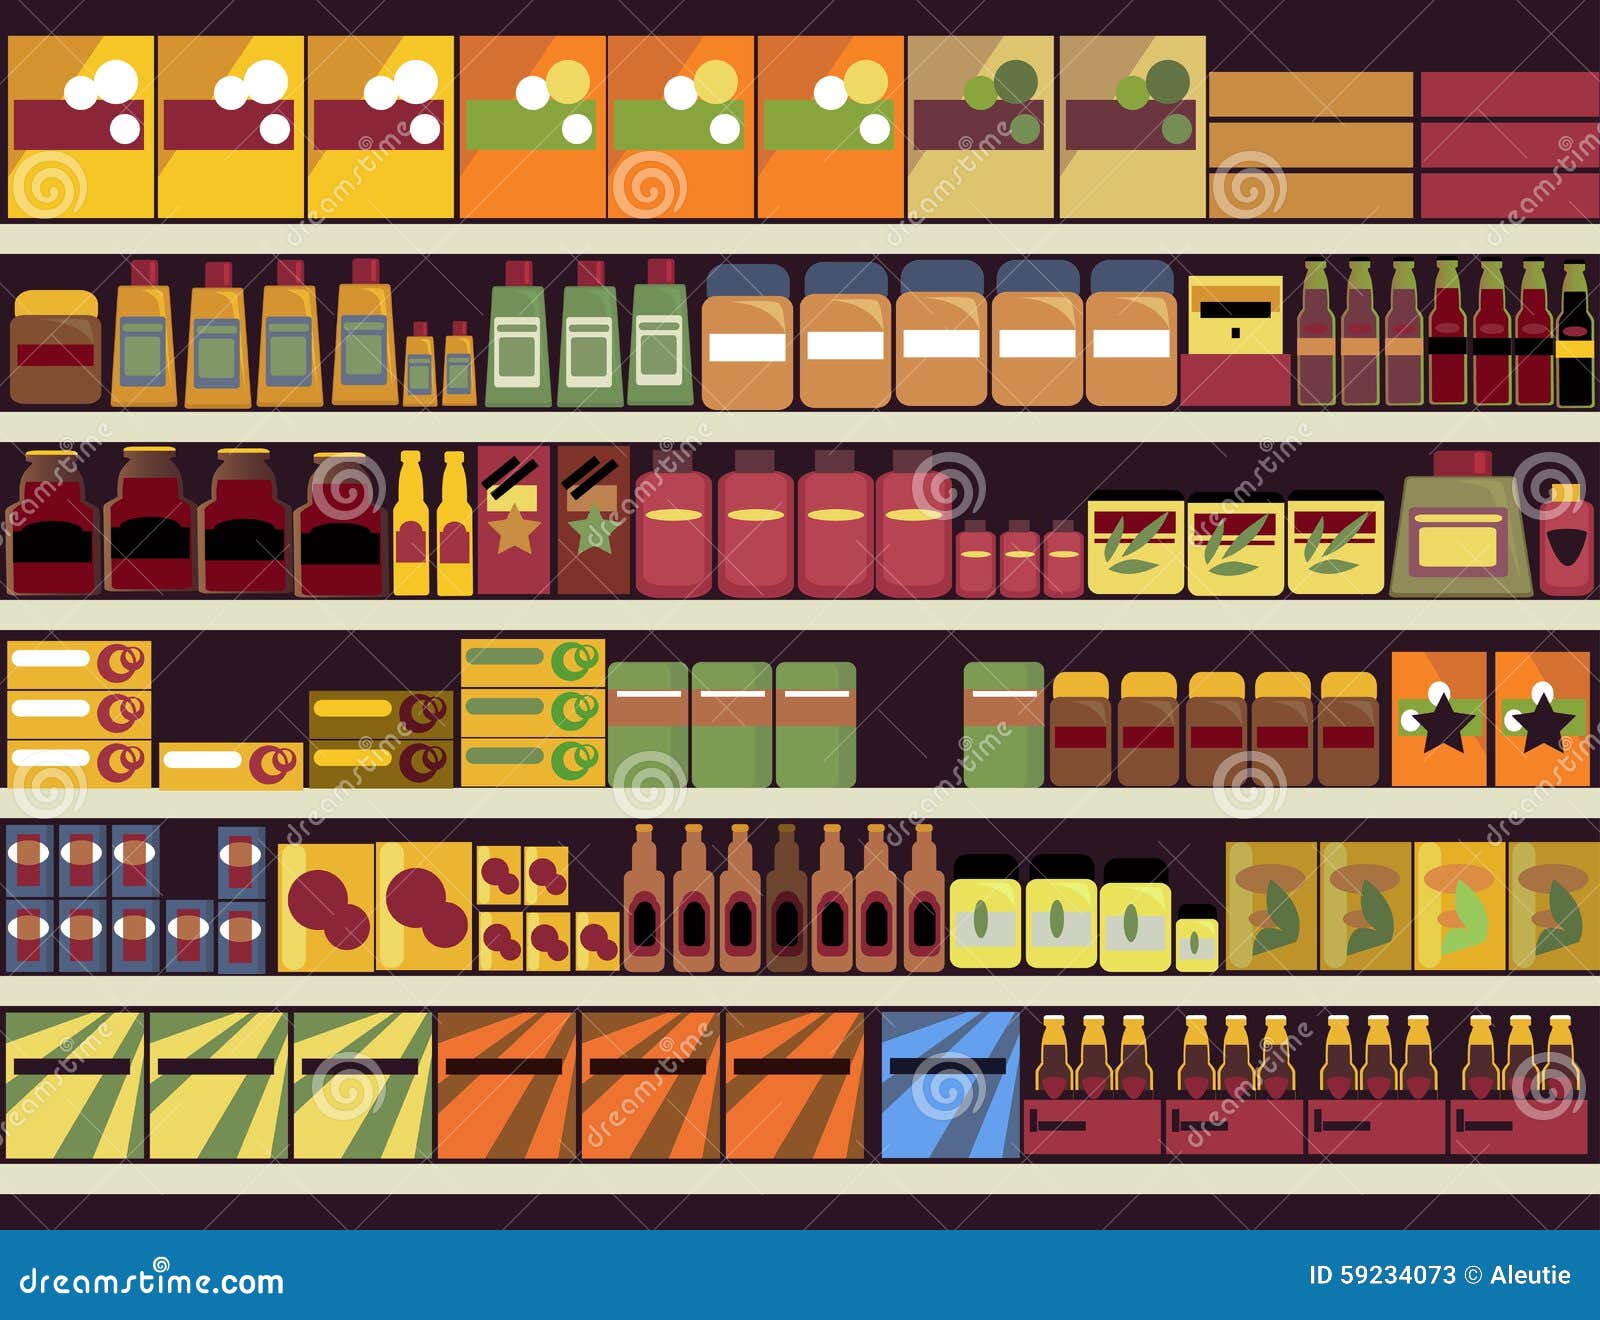 Grocery Store Background Stock Vector - Image: 59234073